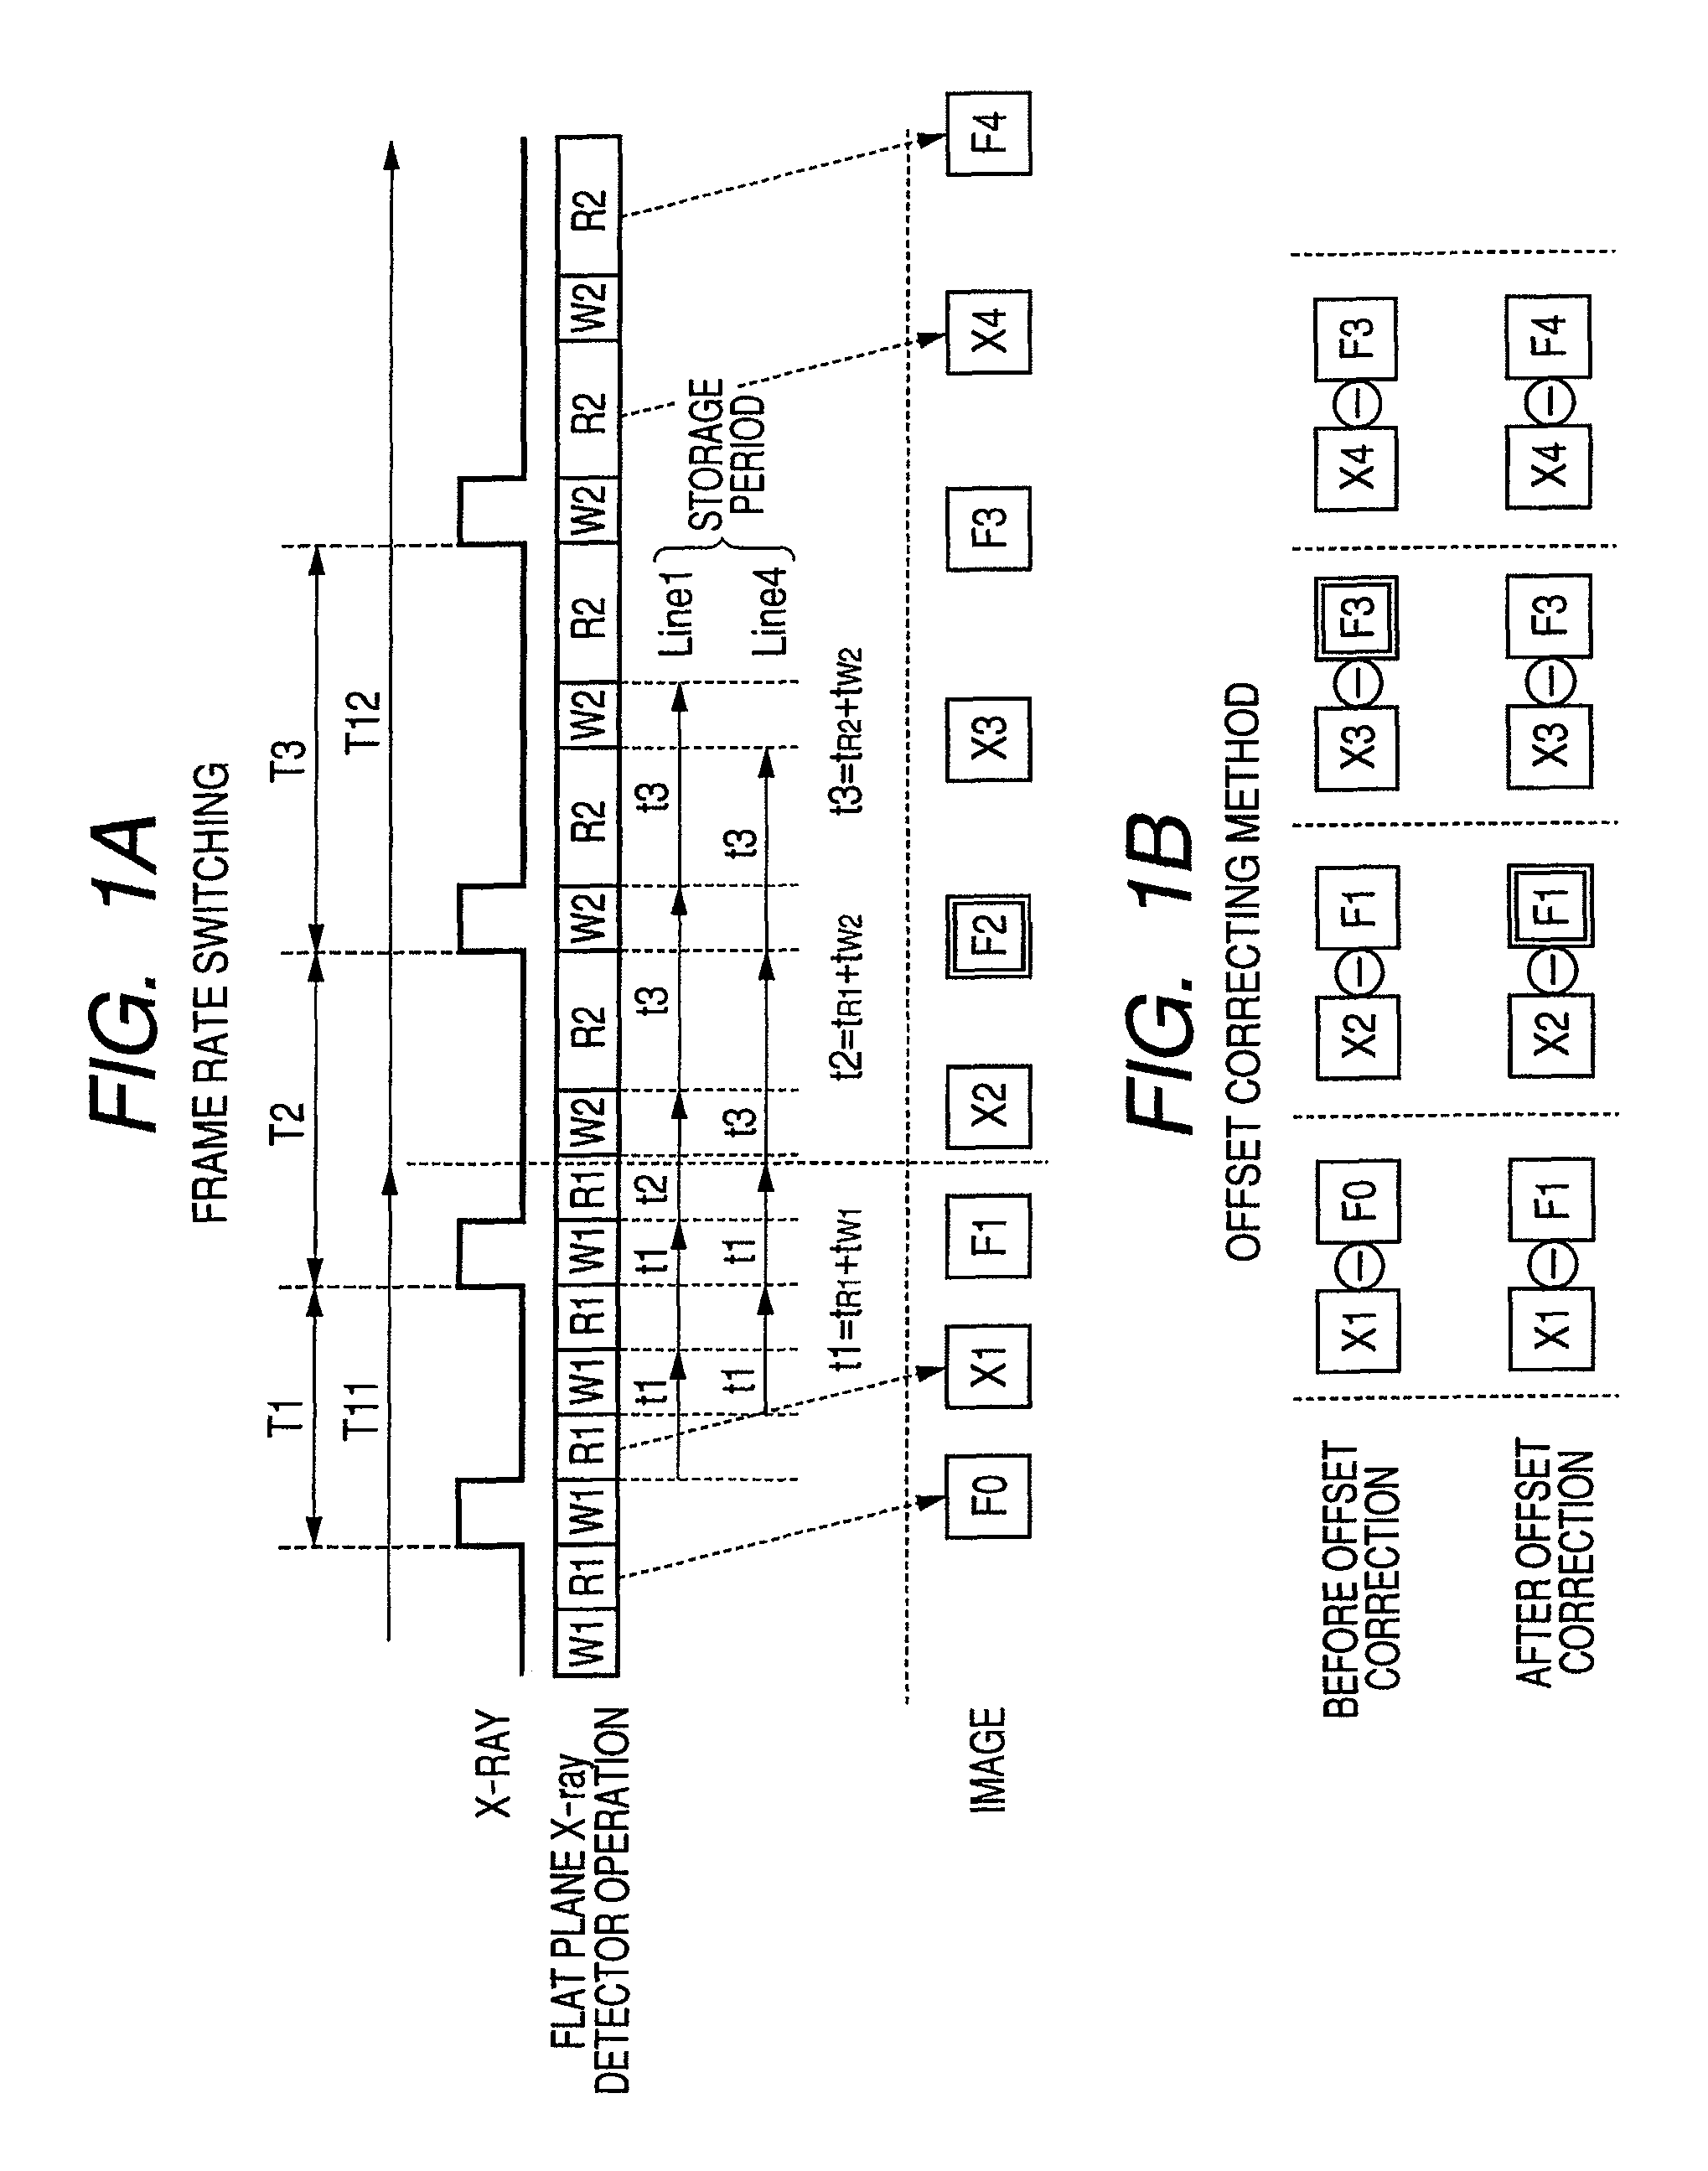 Radiation imaging apparatus, method of controlling the same, and radiation imaging system